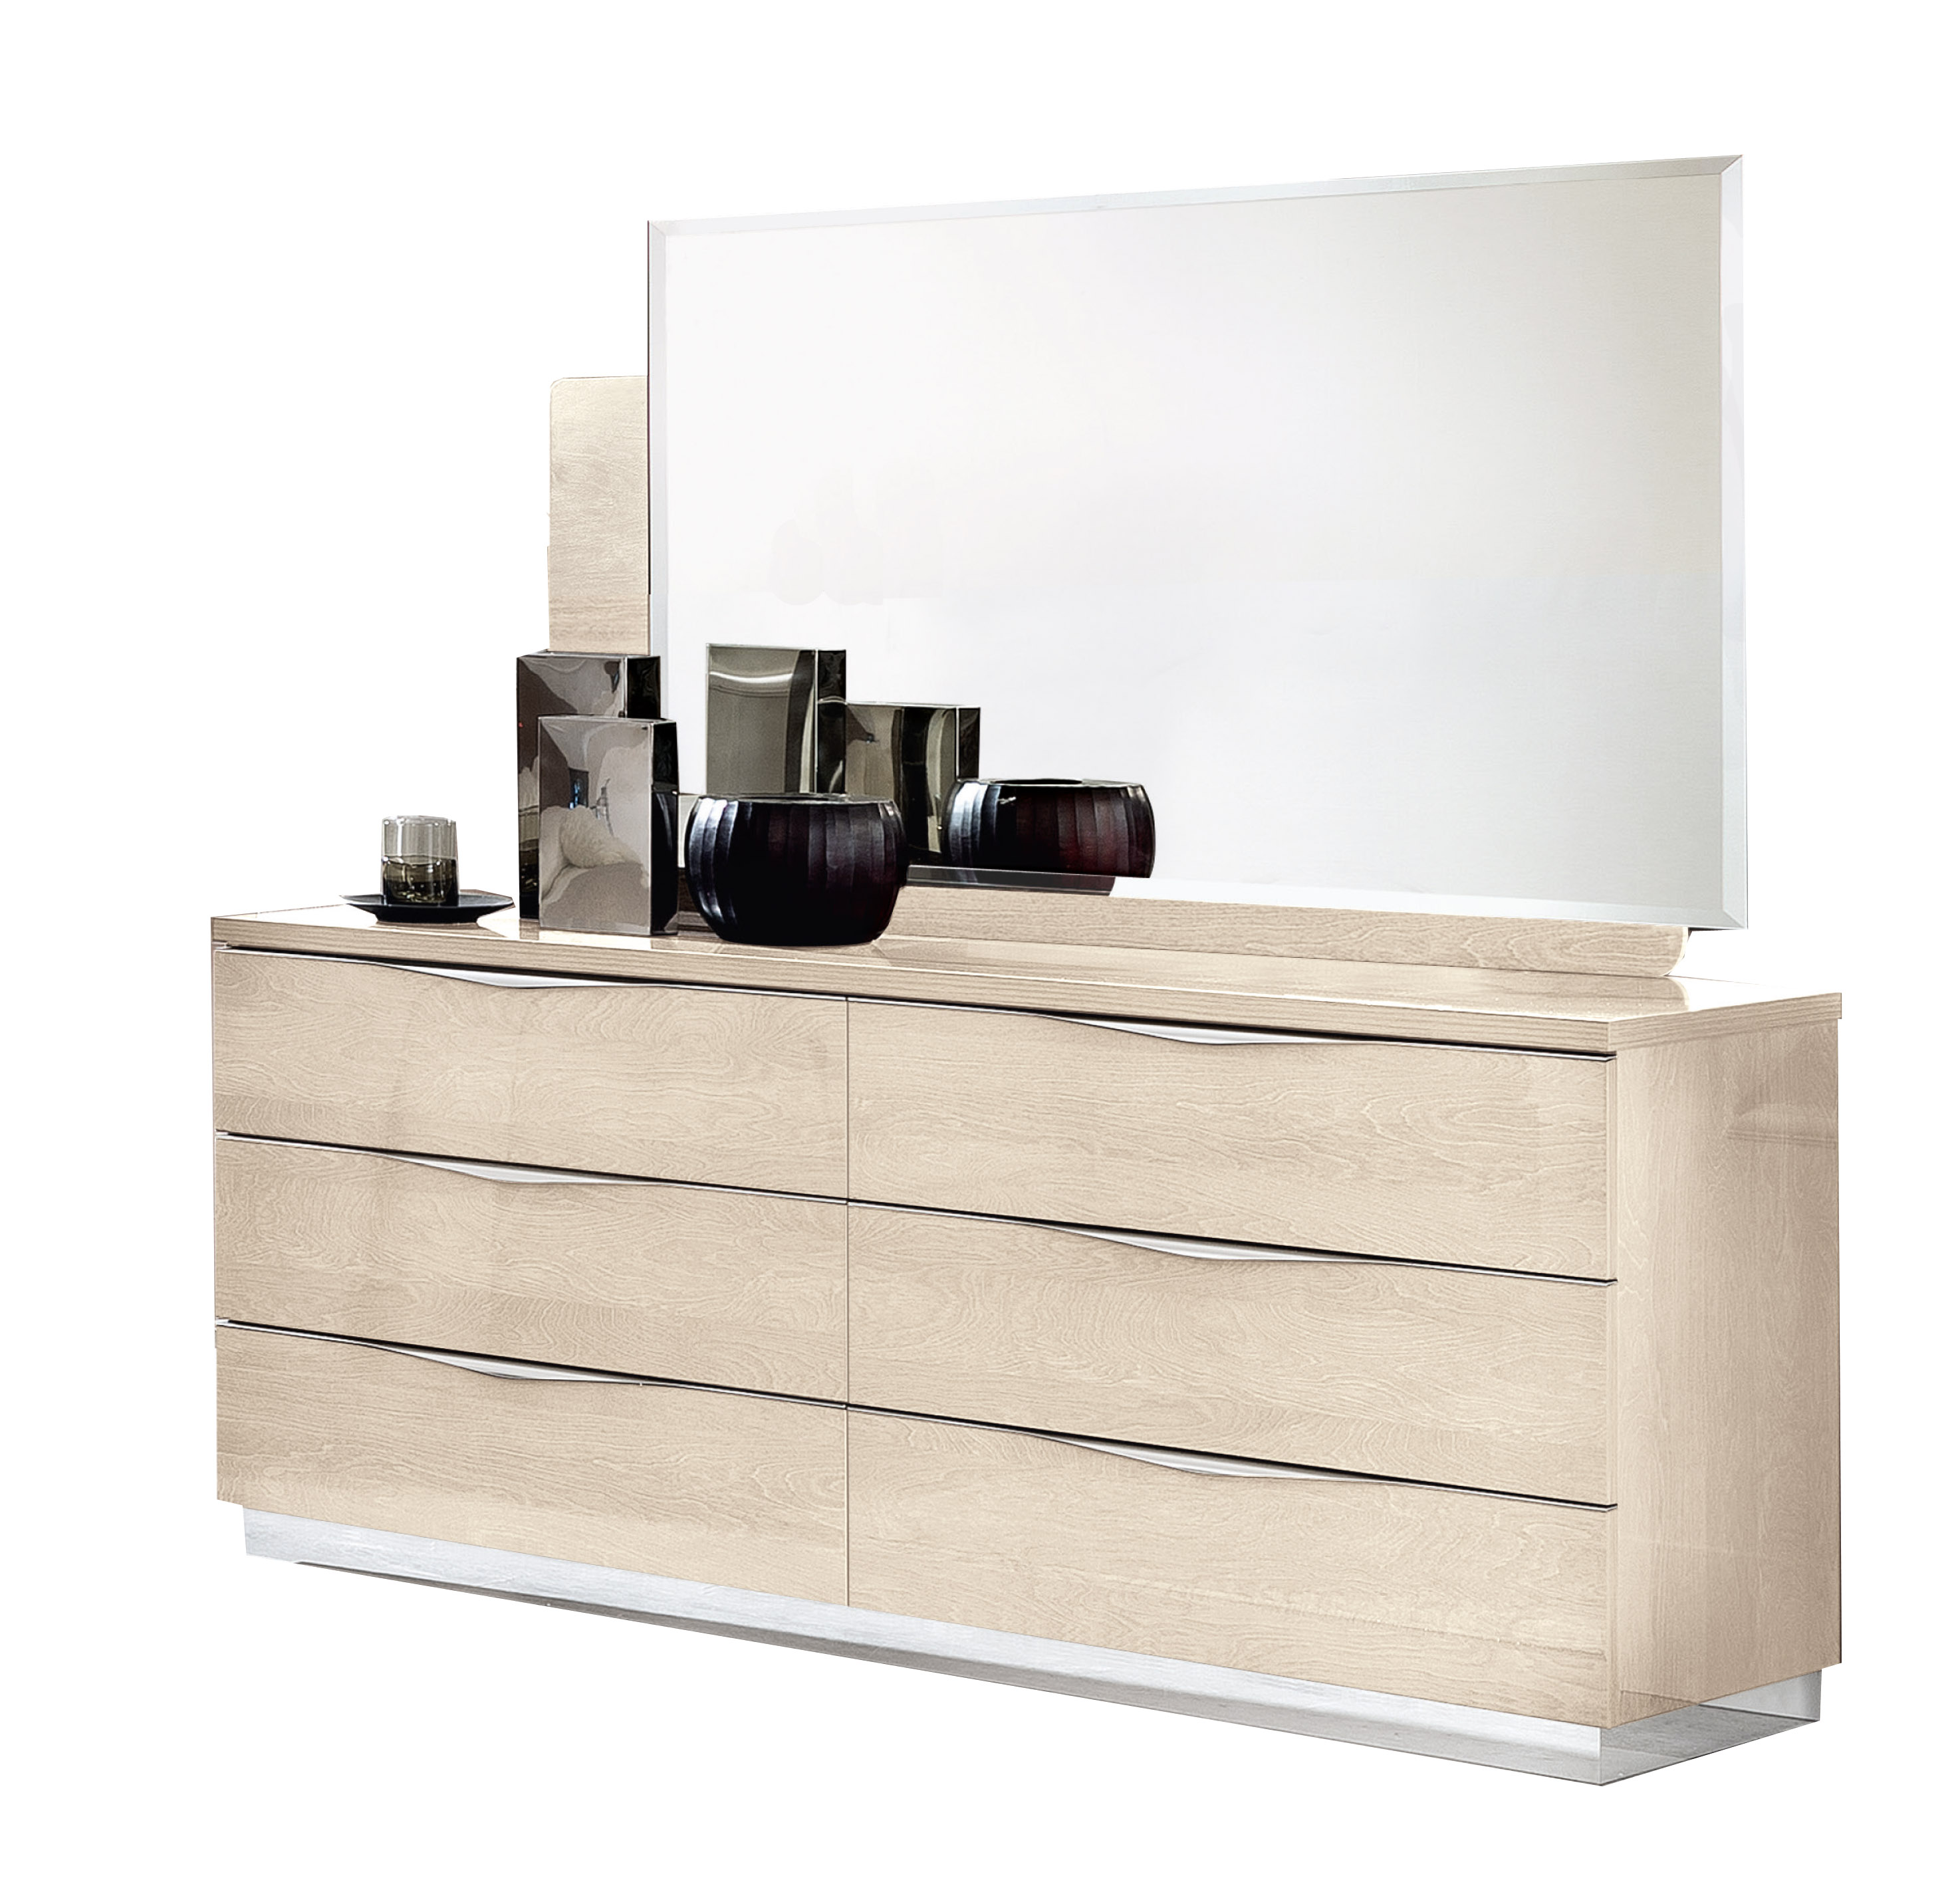 Brands Camel Classic Collection, Italy Platinum LEGNO Double Dresser/Single Dresser/Mirror IVORY